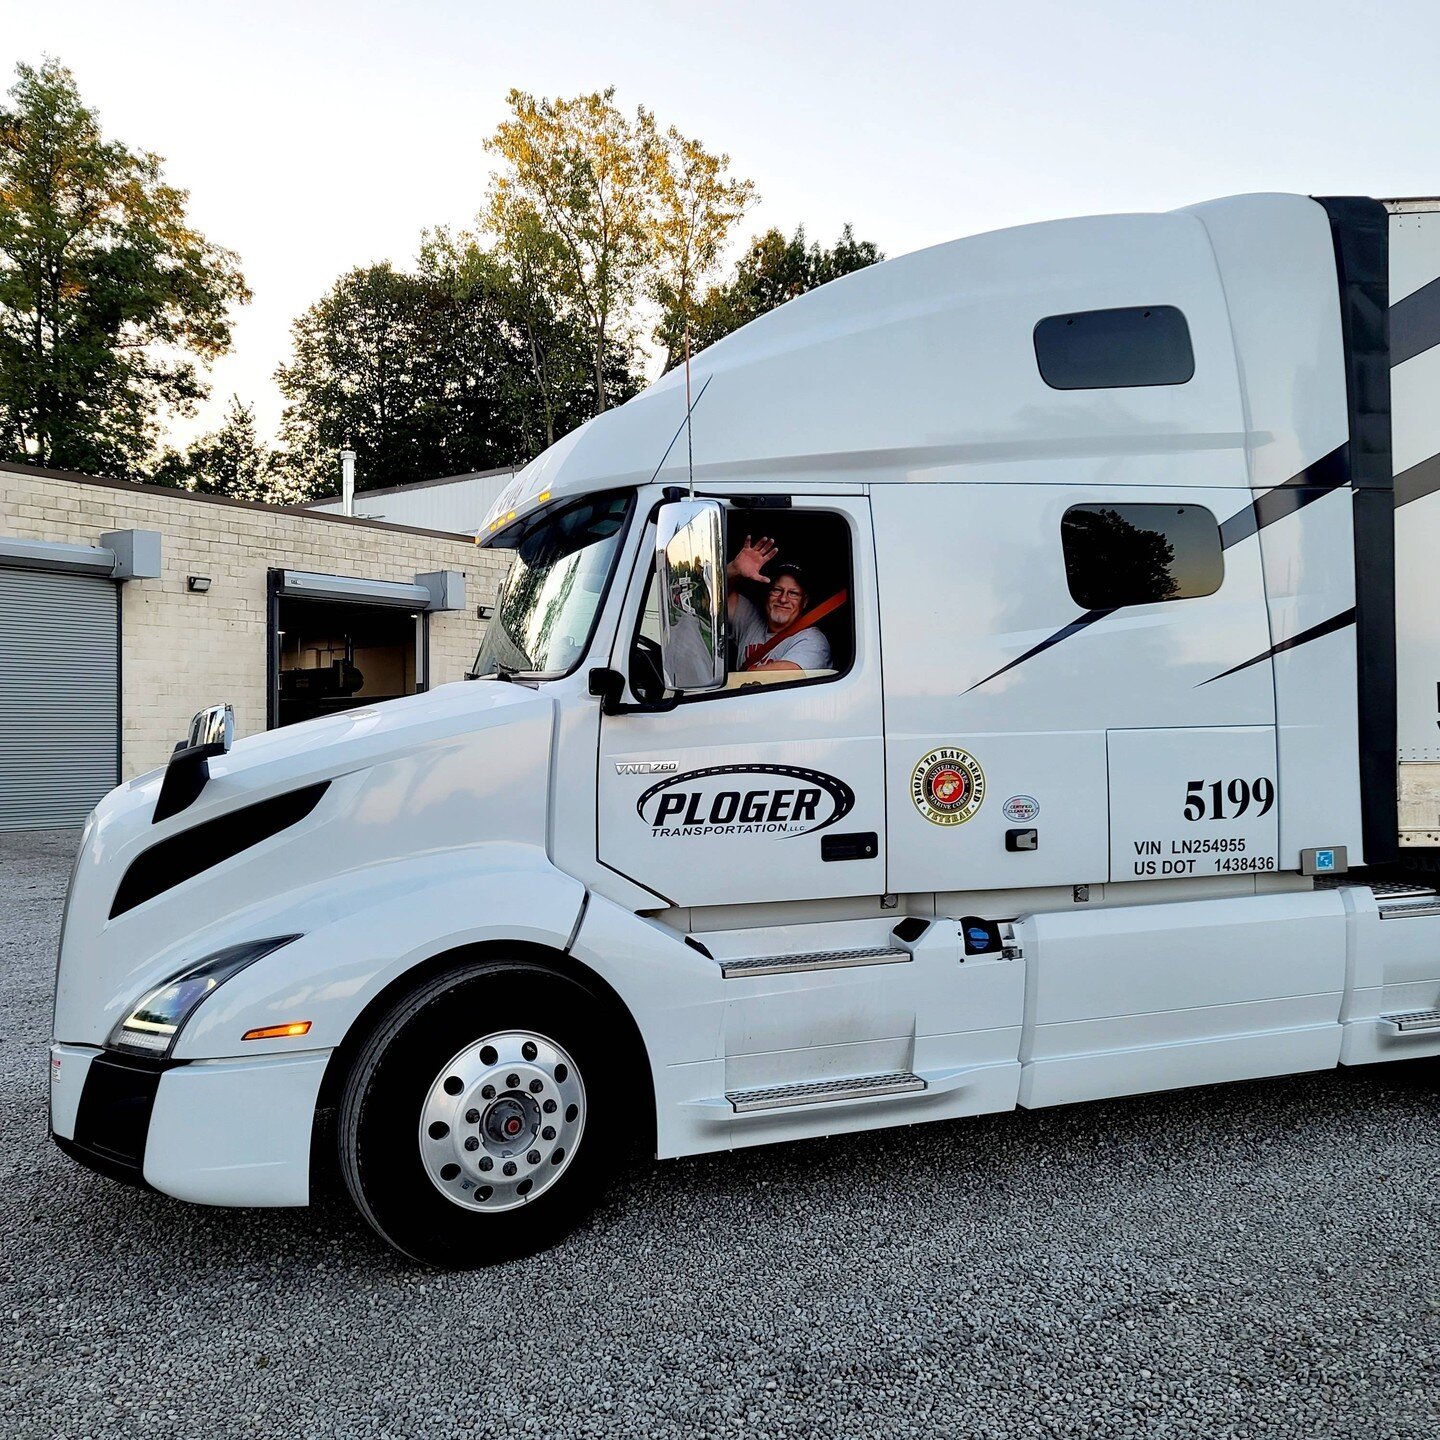 Good morning everyone! Pete Mycek is ready to roll to Virginia! Just look at that beautiful Volvo! Pete is part of our growing fleet of United States Veterans! Thank you to all for your service!

Happy Wednesday everyone and stay safe out there today